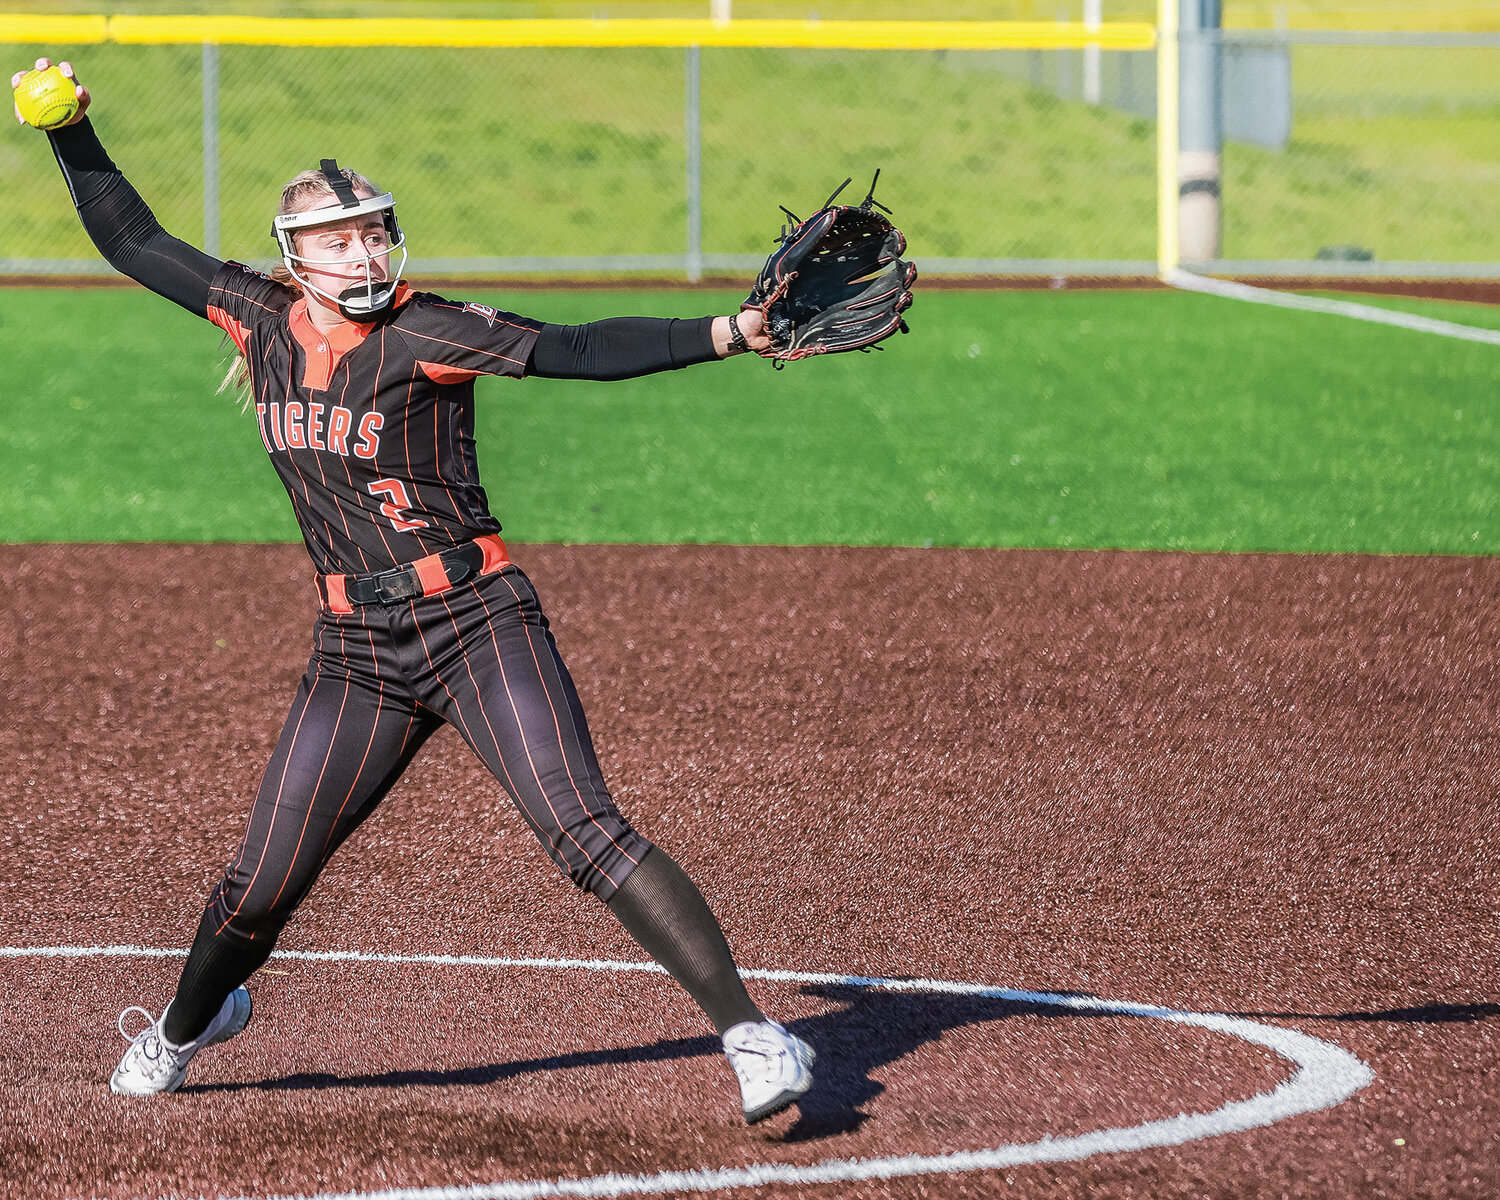 Rylee Rehbein winds up a pitch during Battle Ground's game against Skyview at Fort Vancouver High School on Wednesday, April 12.